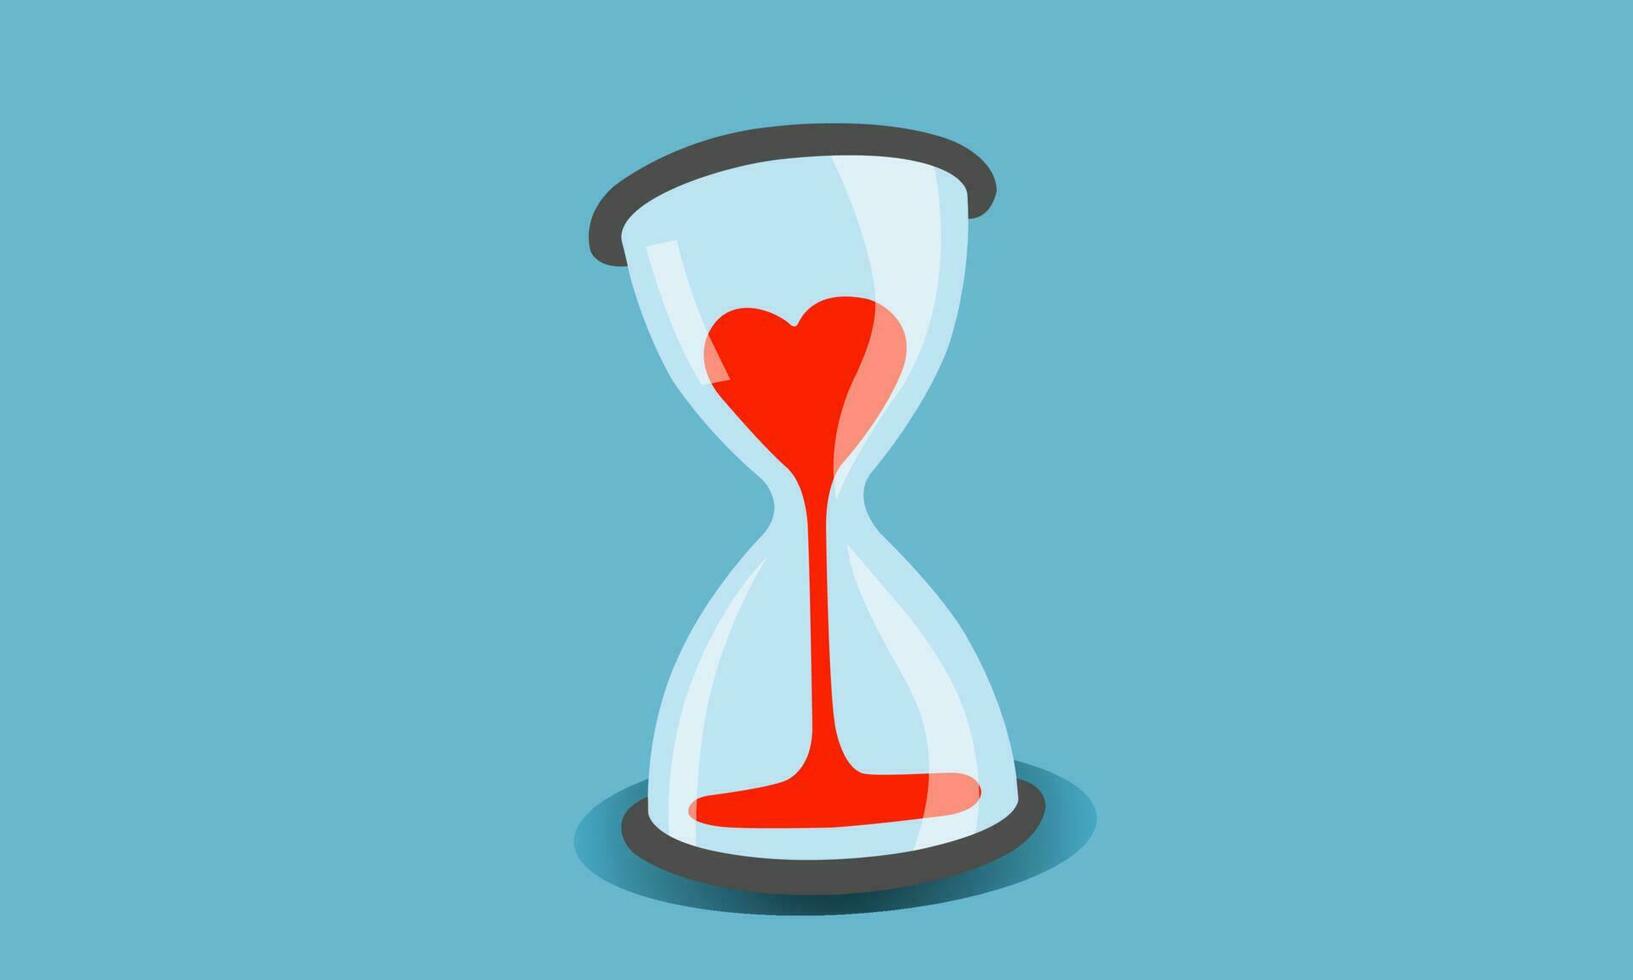 Heart shaped hourglass illustration icon.  Means being in love or the length of our lives. vector